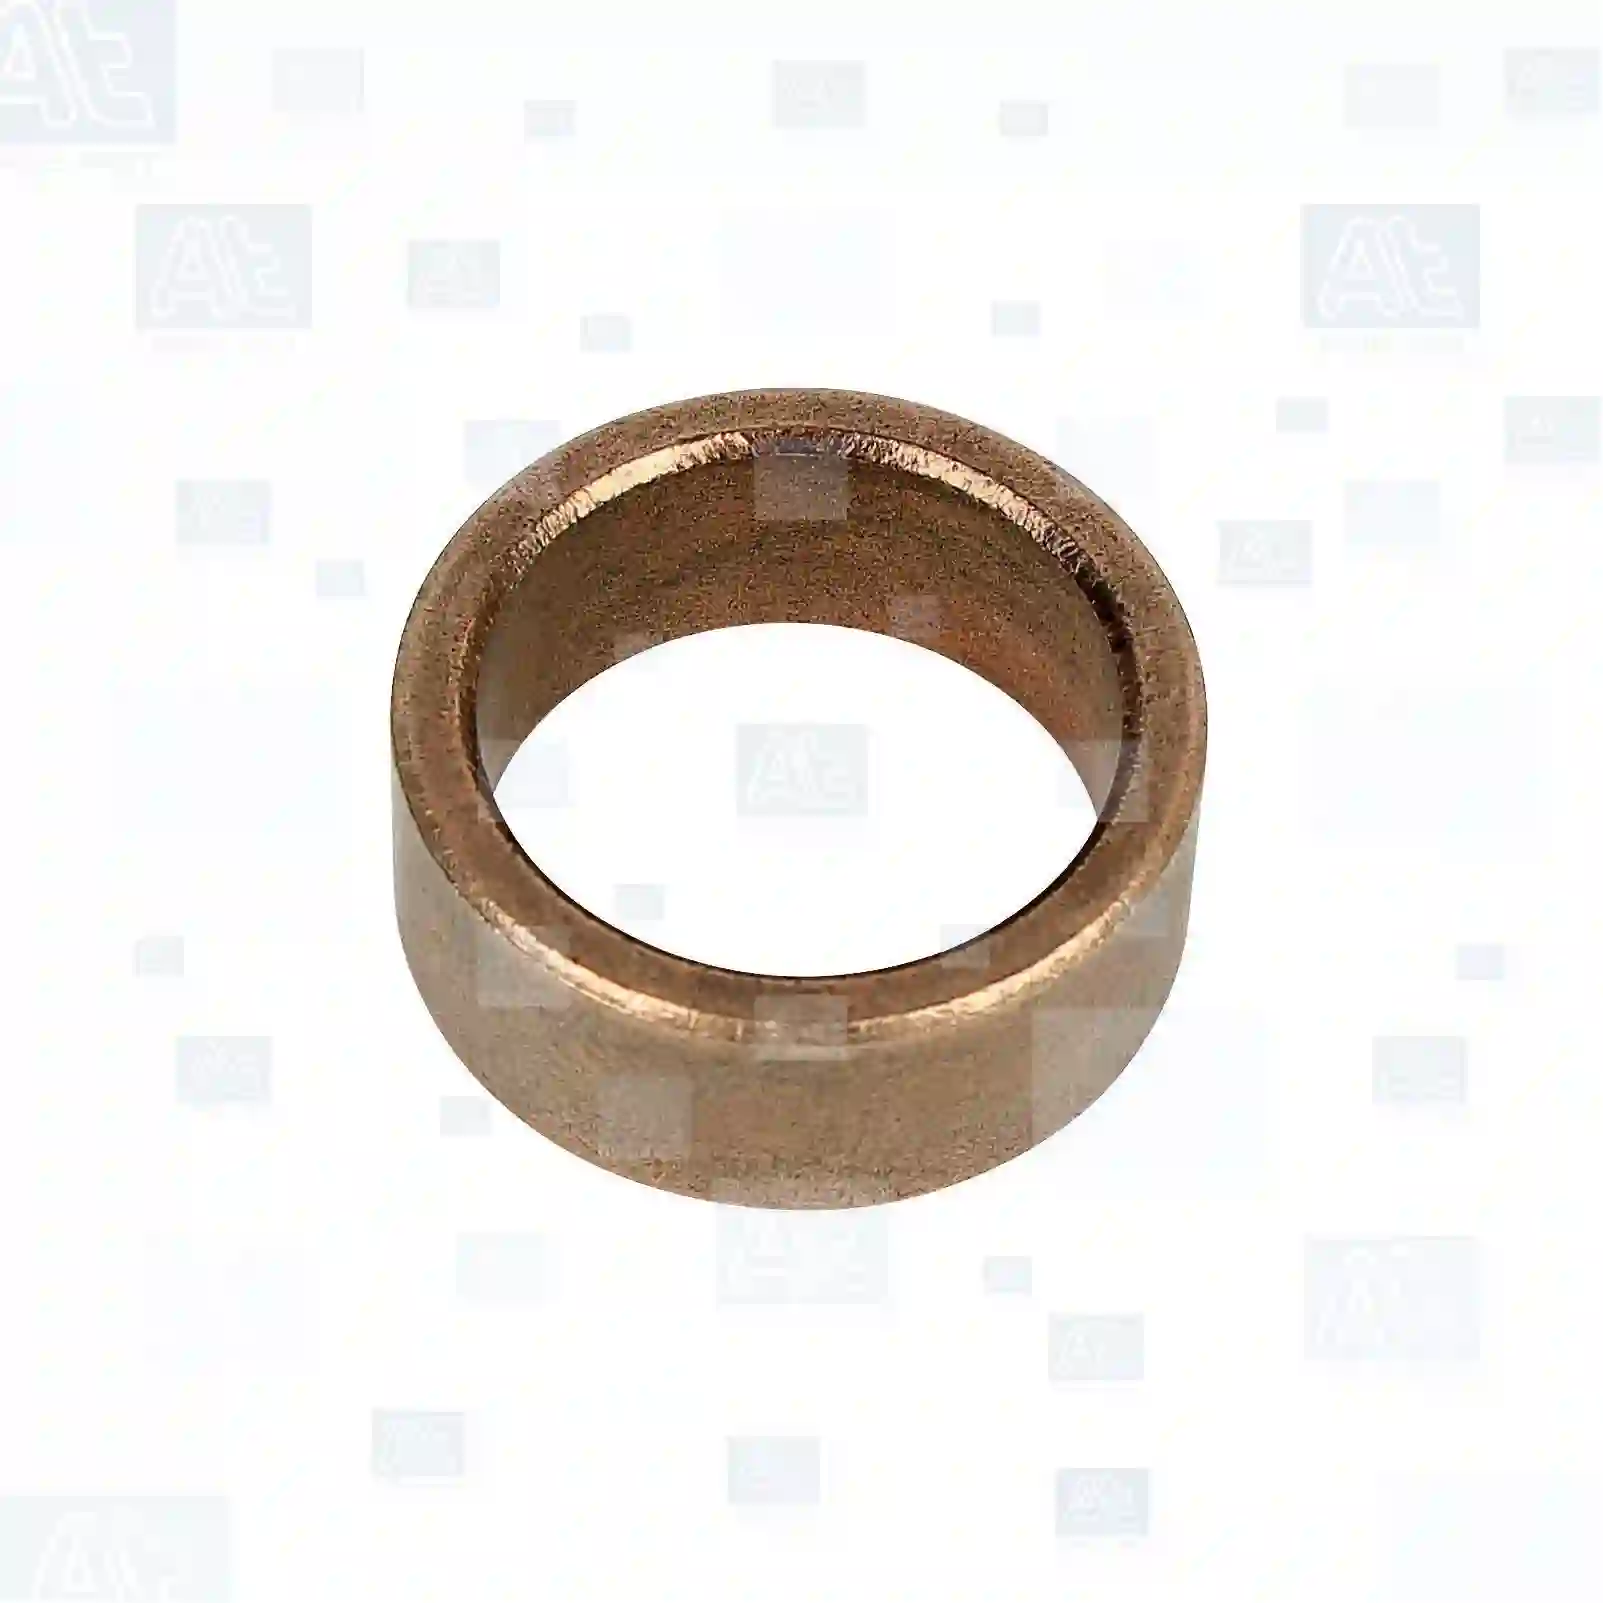 Starter bushing, 77710884, 2Y-2858, 0573340, 573340, 09920342, 79052278, 79850012, 82256320, 925833, 1334728C1, 79052278, 1289971, 09920342, 79052278, 79850012, 82256320, 610705208, 81930200428, 81976020201, 0001514150, 008001730010, E1528607, 0003580519, 7701007381, 7701007381, 192965, 7701007381, 551000301016, 614090726, 009920342, 061654762, 240481 ||  77710884 At Spare Part | Engine, Accelerator Pedal, Camshaft, Connecting Rod, Crankcase, Crankshaft, Cylinder Head, Engine Suspension Mountings, Exhaust Manifold, Exhaust Gas Recirculation, Filter Kits, Flywheel Housing, General Overhaul Kits, Engine, Intake Manifold, Oil Cleaner, Oil Cooler, Oil Filter, Oil Pump, Oil Sump, Piston & Liner, Sensor & Switch, Timing Case, Turbocharger, Cooling System, Belt Tensioner, Coolant Filter, Coolant Pipe, Corrosion Prevention Agent, Drive, Expansion Tank, Fan, Intercooler, Monitors & Gauges, Radiator, Thermostat, V-Belt / Timing belt, Water Pump, Fuel System, Electronical Injector Unit, Feed Pump, Fuel Filter, cpl., Fuel Gauge Sender,  Fuel Line, Fuel Pump, Fuel Tank, Injection Line Kit, Injection Pump, Exhaust System, Clutch & Pedal, Gearbox, Propeller Shaft, Axles, Brake System, Hubs & Wheels, Suspension, Leaf Spring, Universal Parts / Accessories, Steering, Electrical System, Cabin Starter bushing, 77710884, 2Y-2858, 0573340, 573340, 09920342, 79052278, 79850012, 82256320, 925833, 1334728C1, 79052278, 1289971, 09920342, 79052278, 79850012, 82256320, 610705208, 81930200428, 81976020201, 0001514150, 008001730010, E1528607, 0003580519, 7701007381, 7701007381, 192965, 7701007381, 551000301016, 614090726, 009920342, 061654762, 240481 ||  77710884 At Spare Part | Engine, Accelerator Pedal, Camshaft, Connecting Rod, Crankcase, Crankshaft, Cylinder Head, Engine Suspension Mountings, Exhaust Manifold, Exhaust Gas Recirculation, Filter Kits, Flywheel Housing, General Overhaul Kits, Engine, Intake Manifold, Oil Cleaner, Oil Cooler, Oil Filter, Oil Pump, Oil Sump, Piston & Liner, Sensor & Switch, Timing Case, Turbocharger, Cooling System, Belt Tensioner, Coolant Filter, Coolant Pipe, Corrosion Prevention Agent, Drive, Expansion Tank, Fan, Intercooler, Monitors & Gauges, Radiator, Thermostat, V-Belt / Timing belt, Water Pump, Fuel System, Electronical Injector Unit, Feed Pump, Fuel Filter, cpl., Fuel Gauge Sender,  Fuel Line, Fuel Pump, Fuel Tank, Injection Line Kit, Injection Pump, Exhaust System, Clutch & Pedal, Gearbox, Propeller Shaft, Axles, Brake System, Hubs & Wheels, Suspension, Leaf Spring, Universal Parts / Accessories, Steering, Electrical System, Cabin